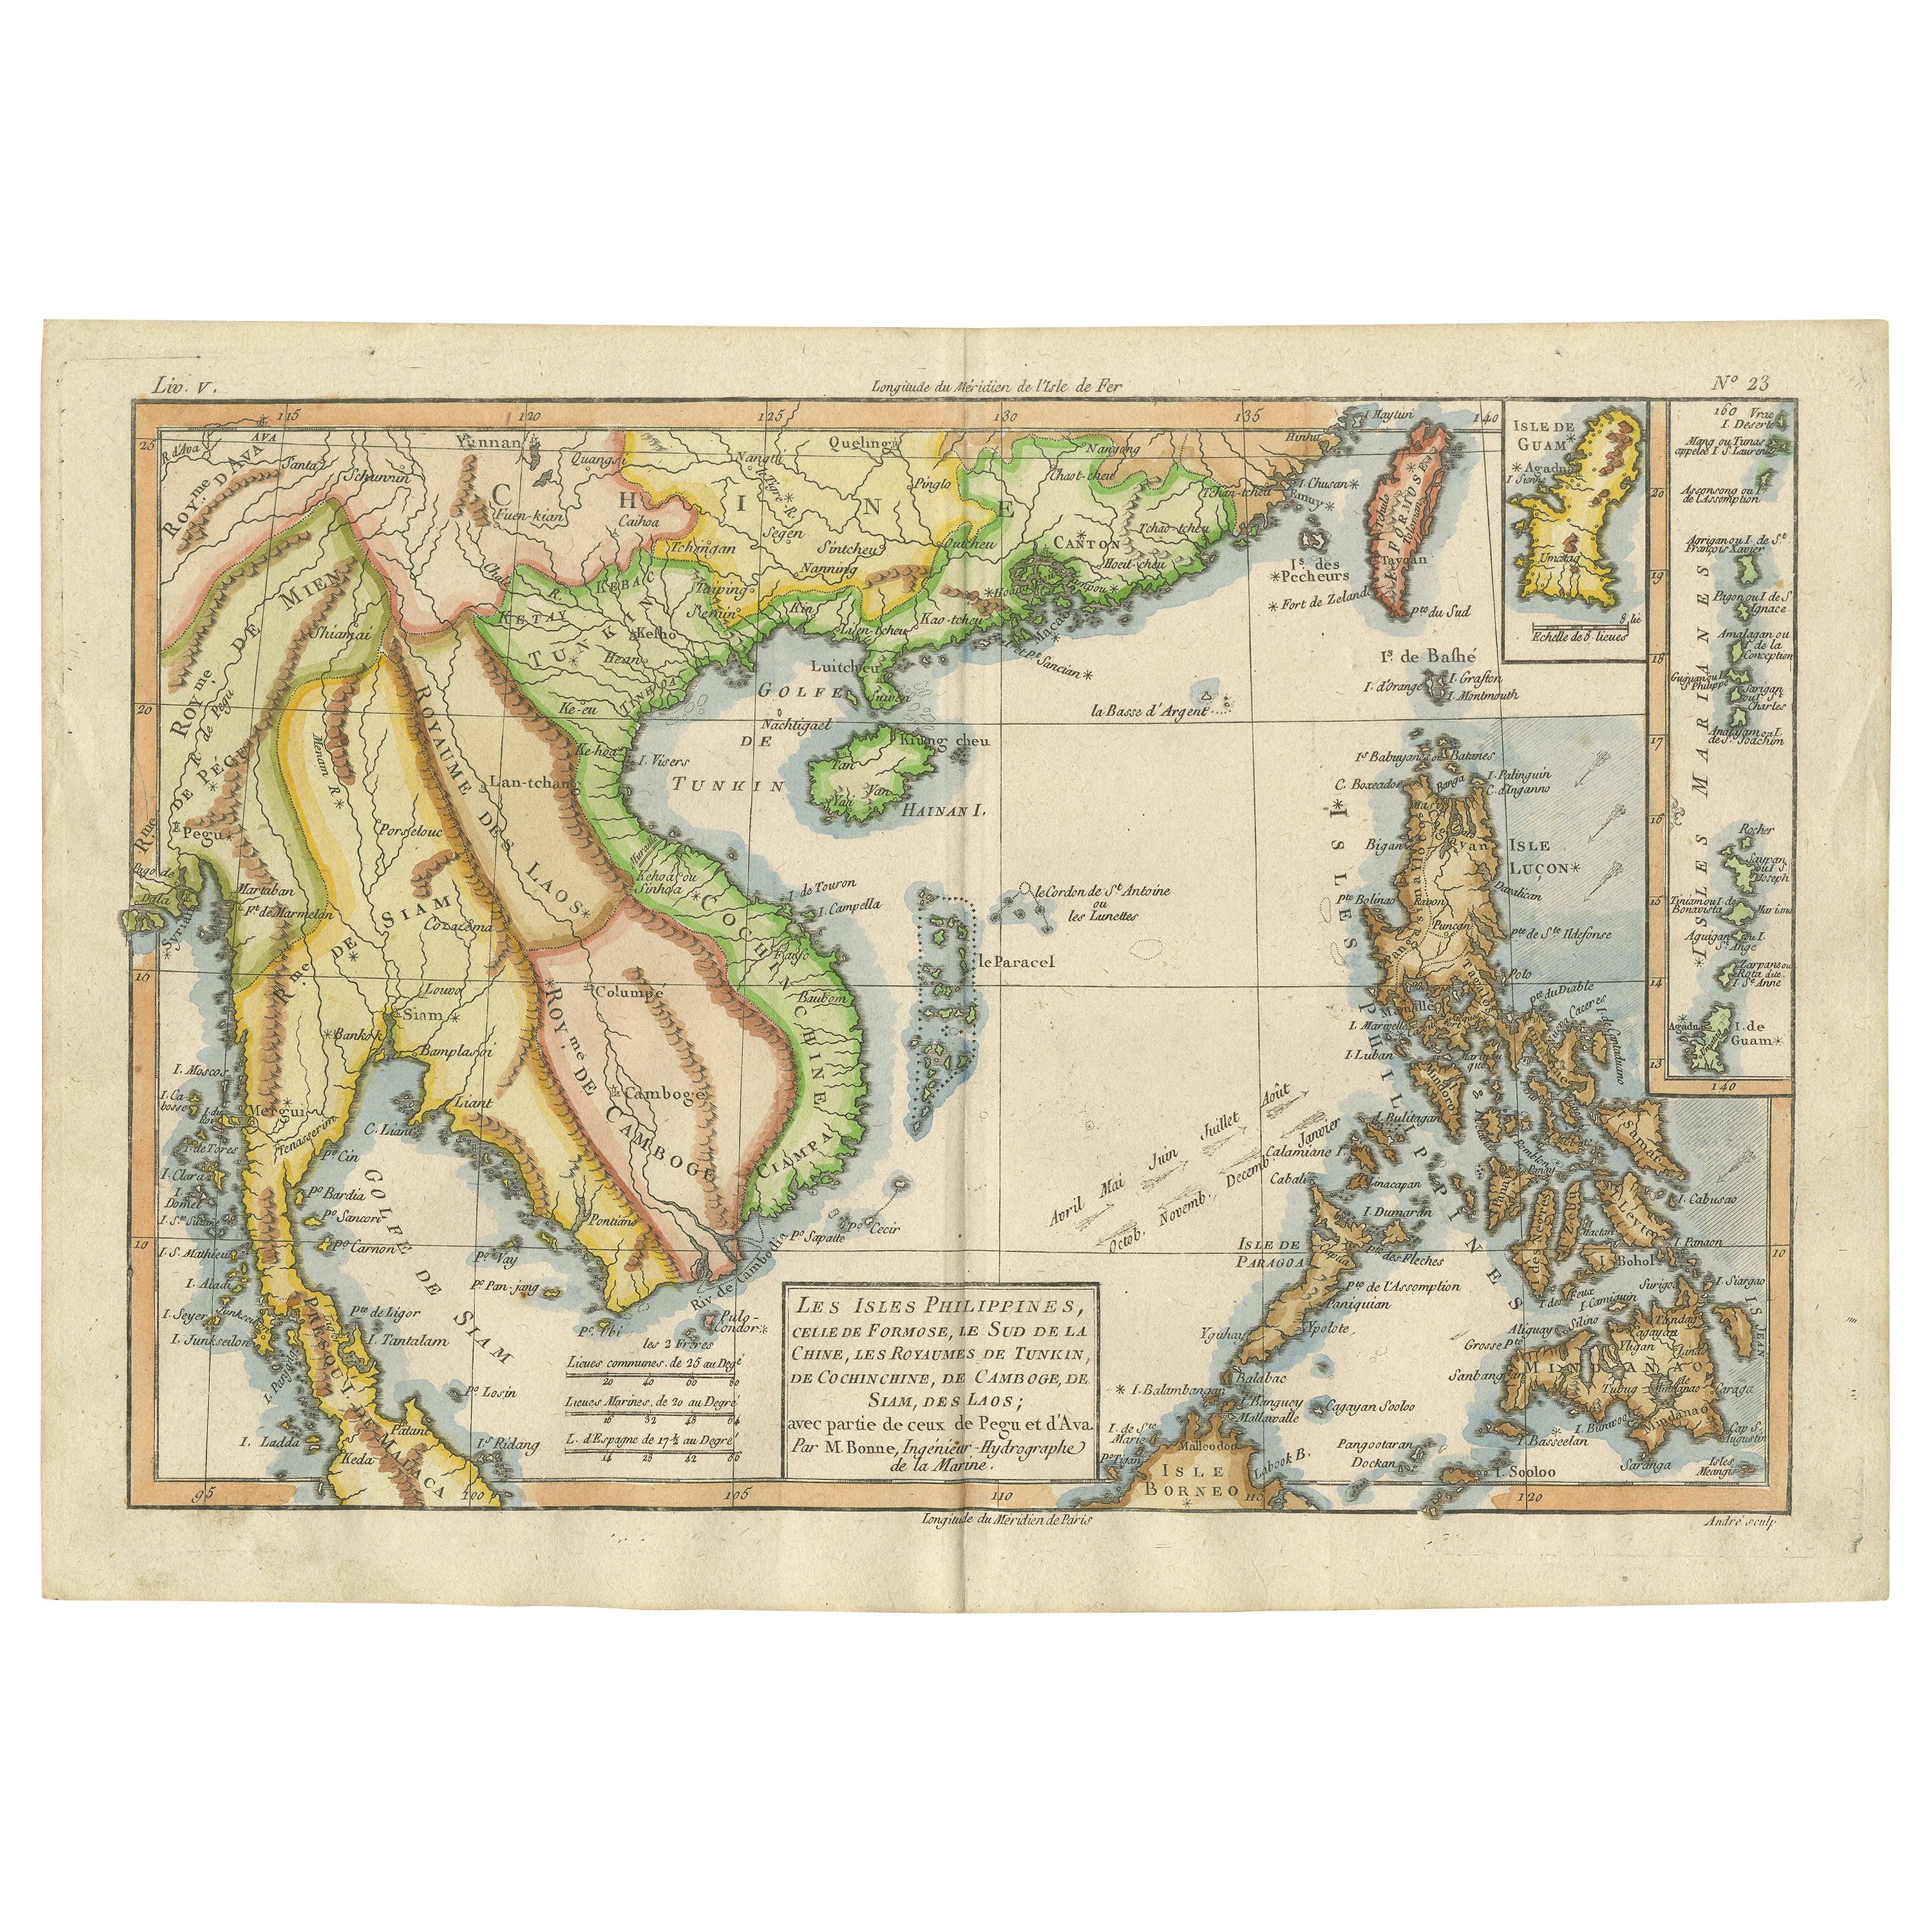 Antique Map of the Philippines, Taiwan and Surroundings by Bonne '1780'